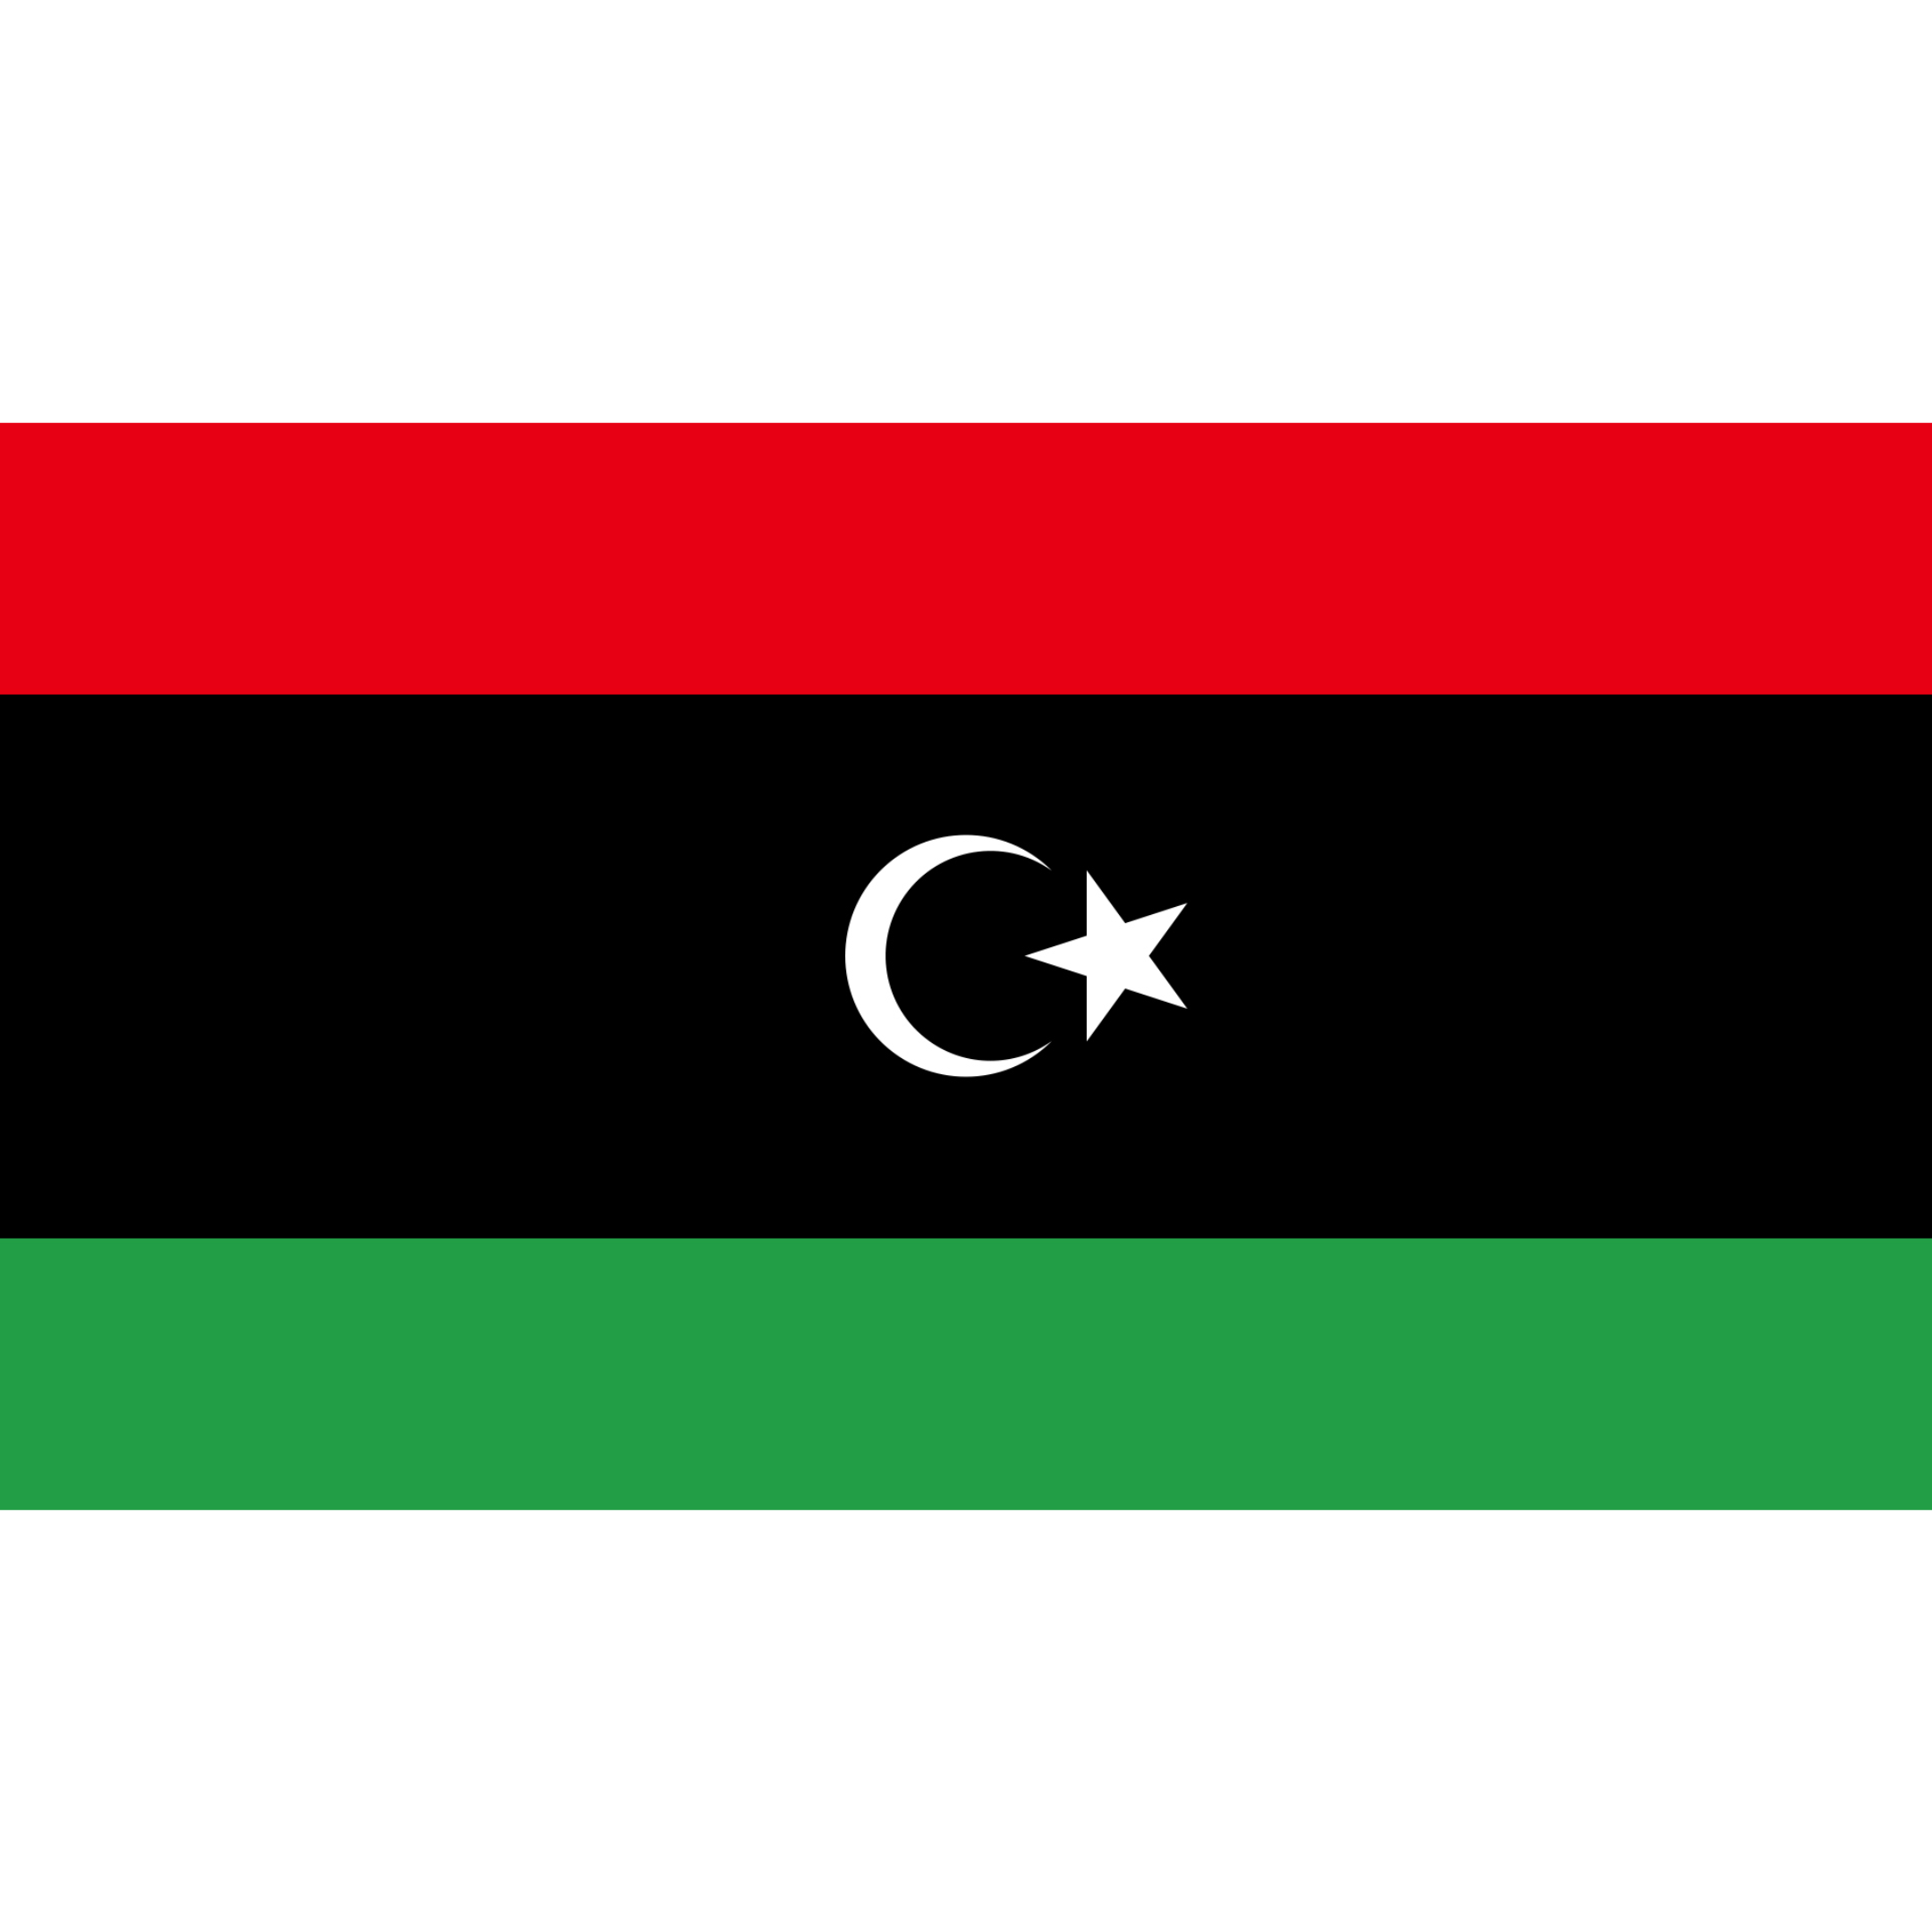 The flag of Libya has 3 horizontal red, black (double width) and green bands, with a white star and crescent in the centre.